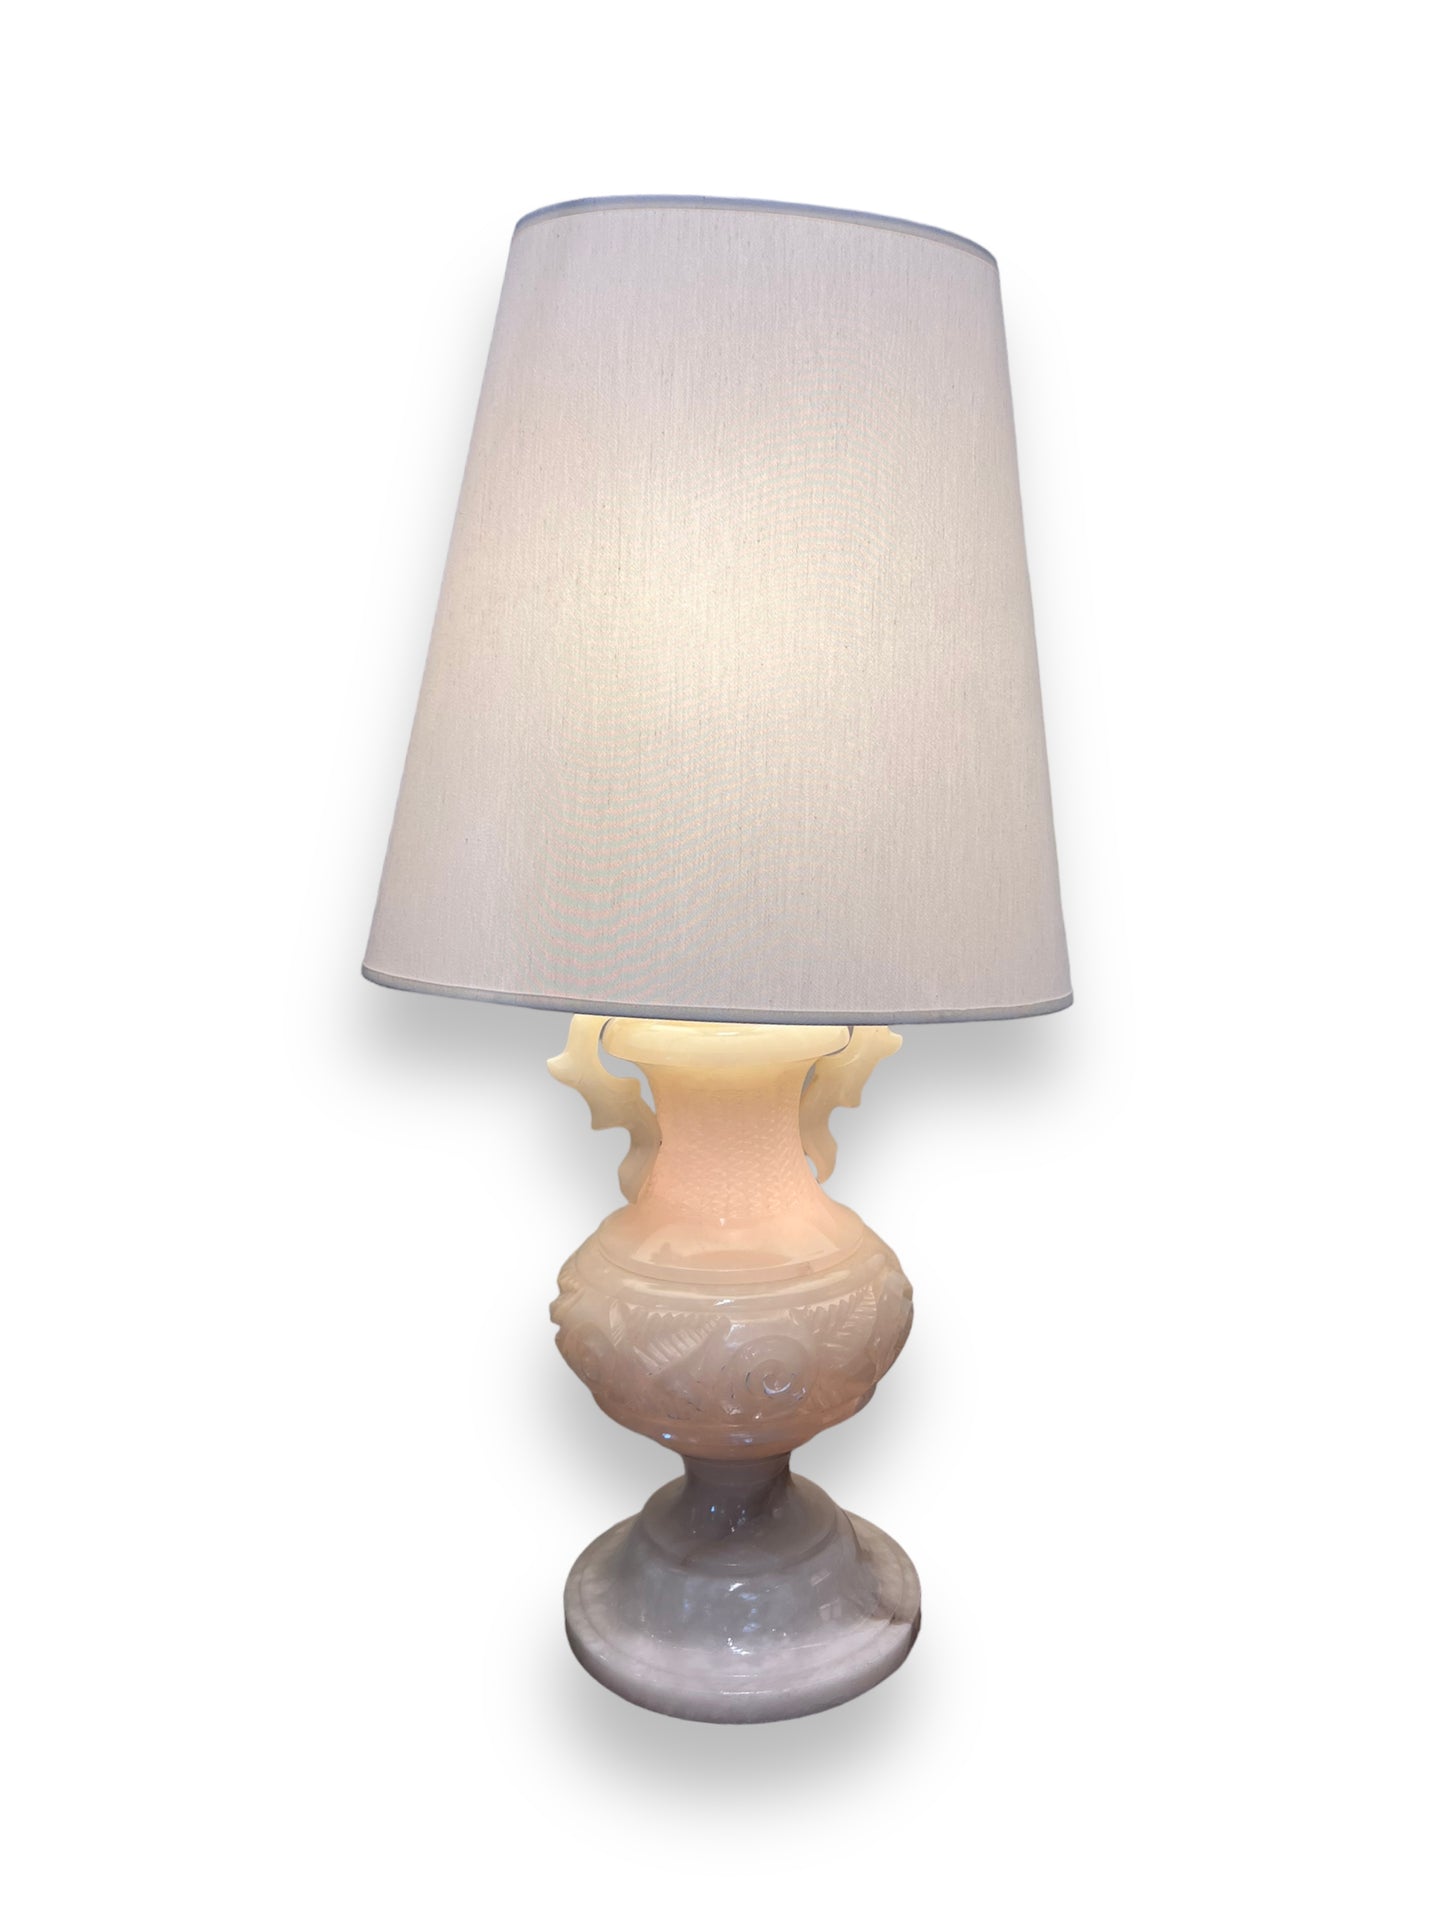 Set of Onyx table lamps - DeFrenS